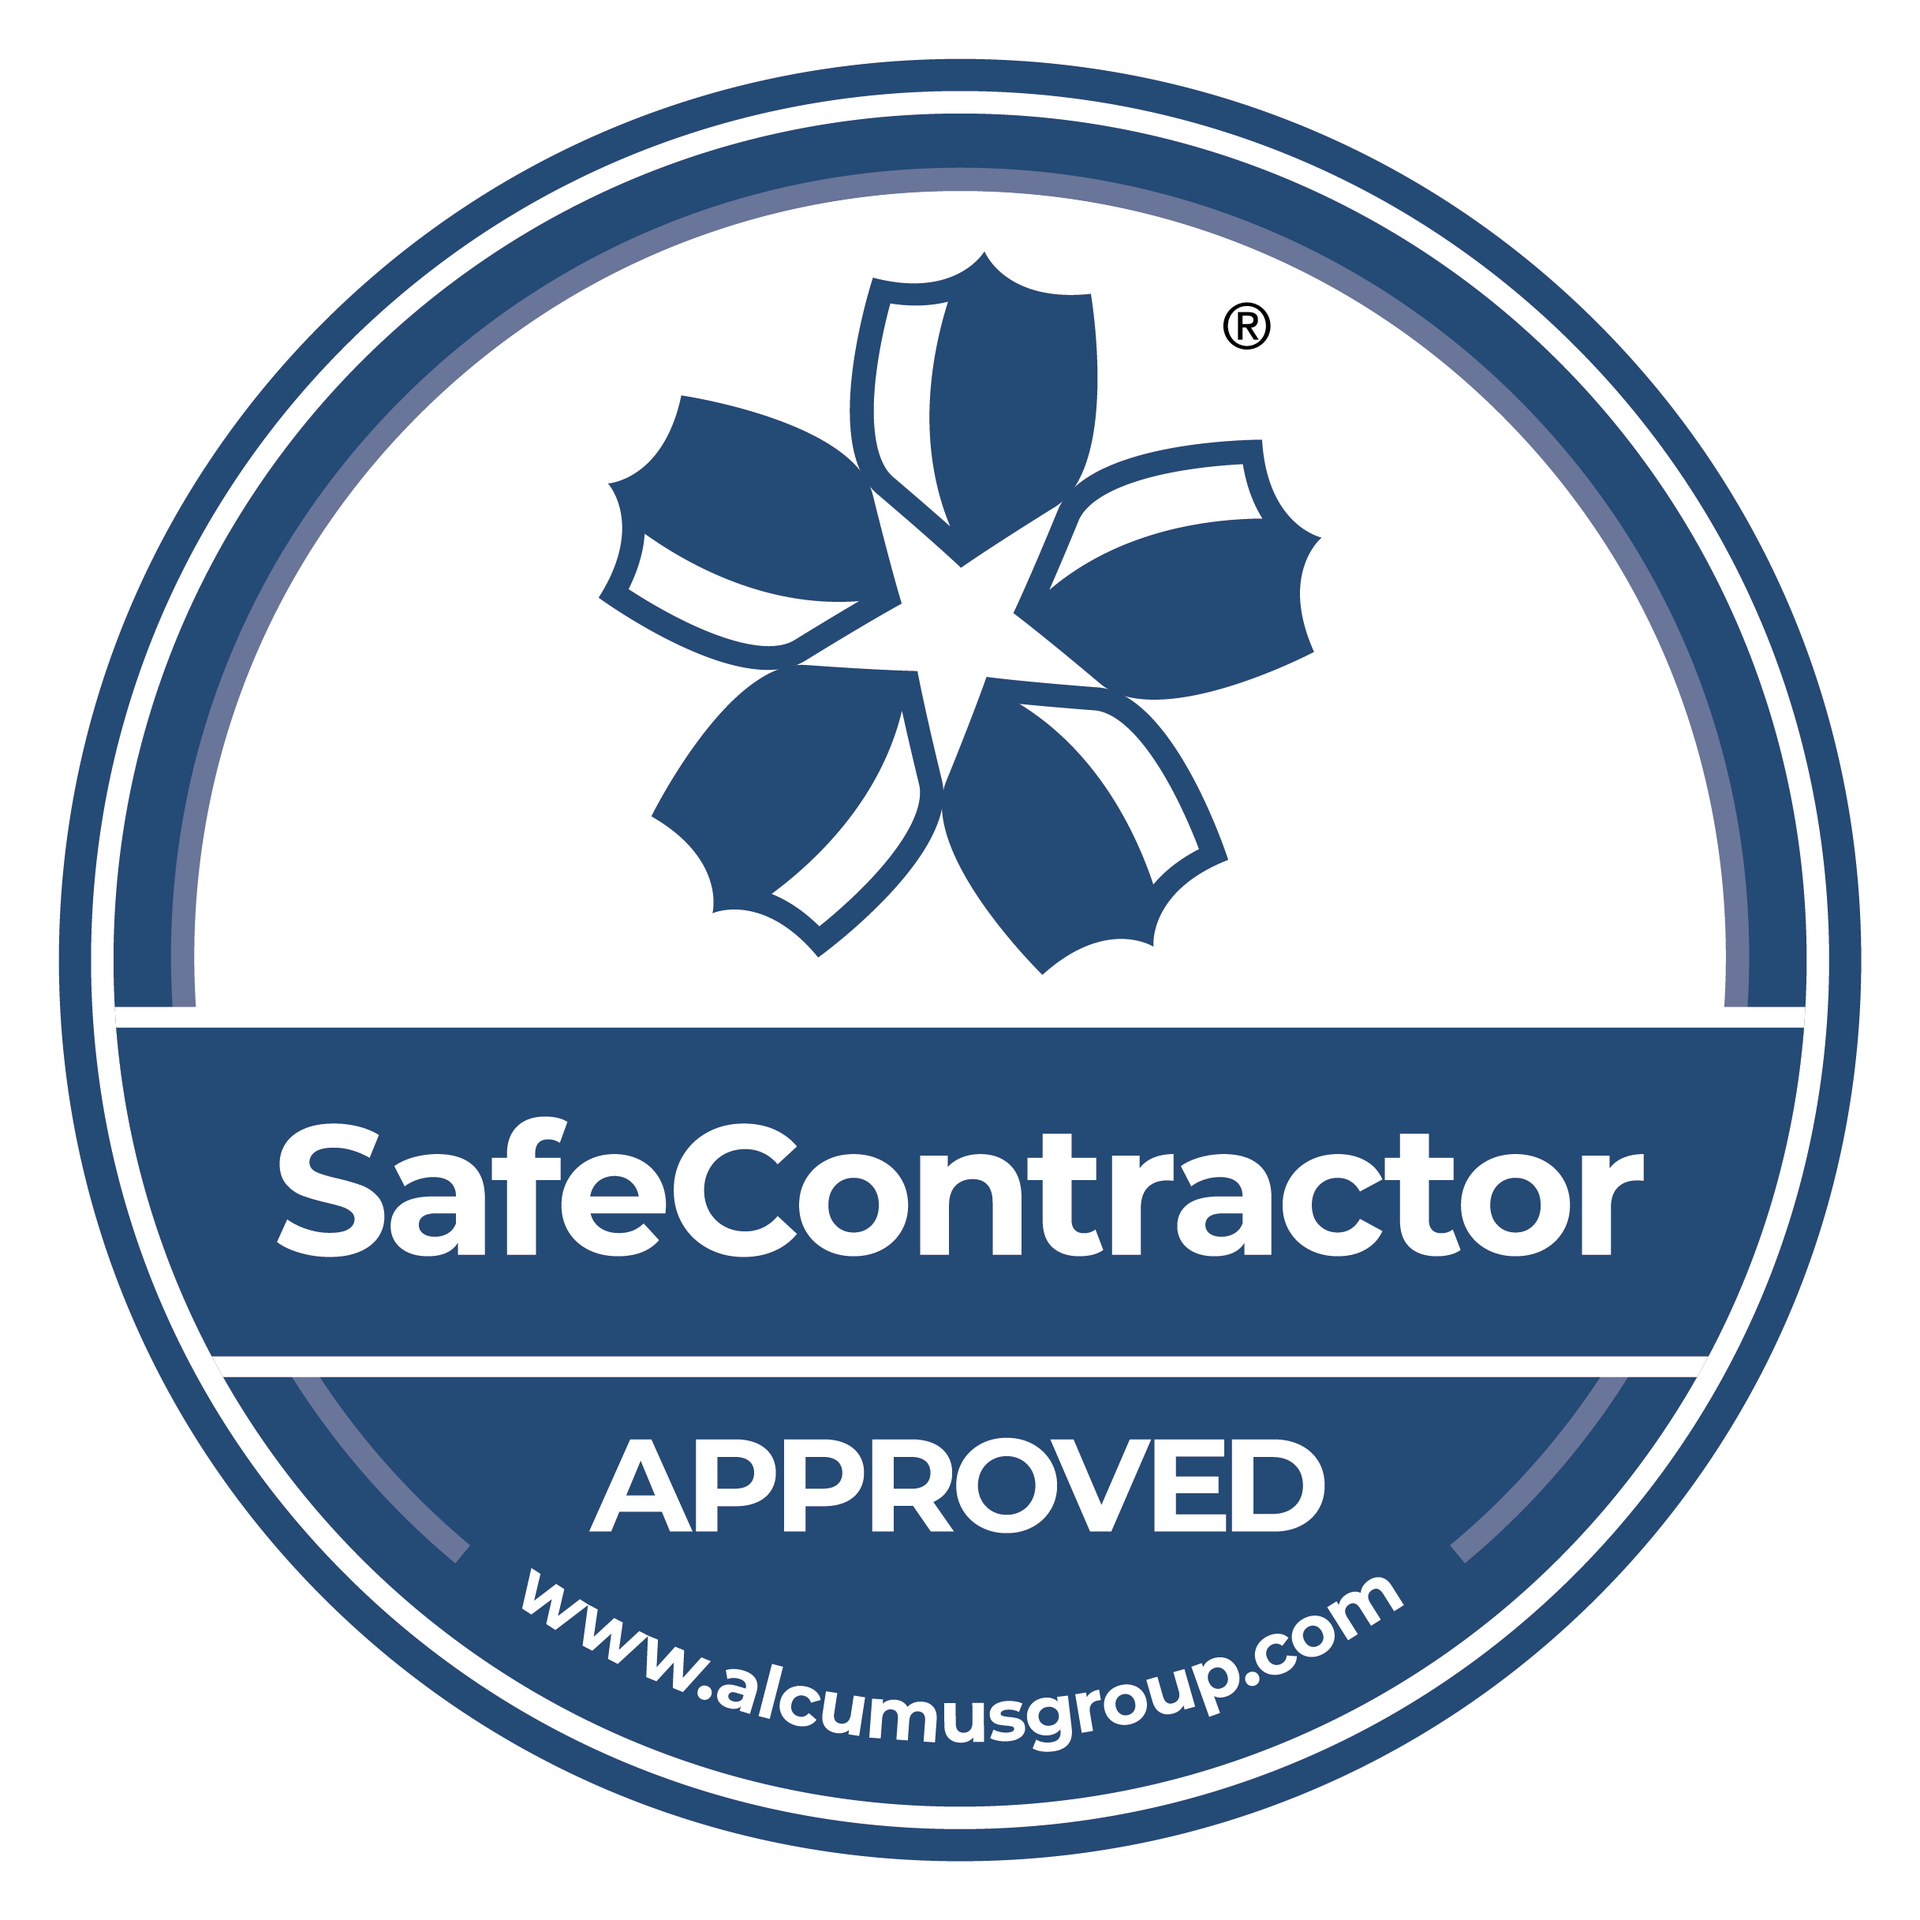 Safe Contractor approved accreditation